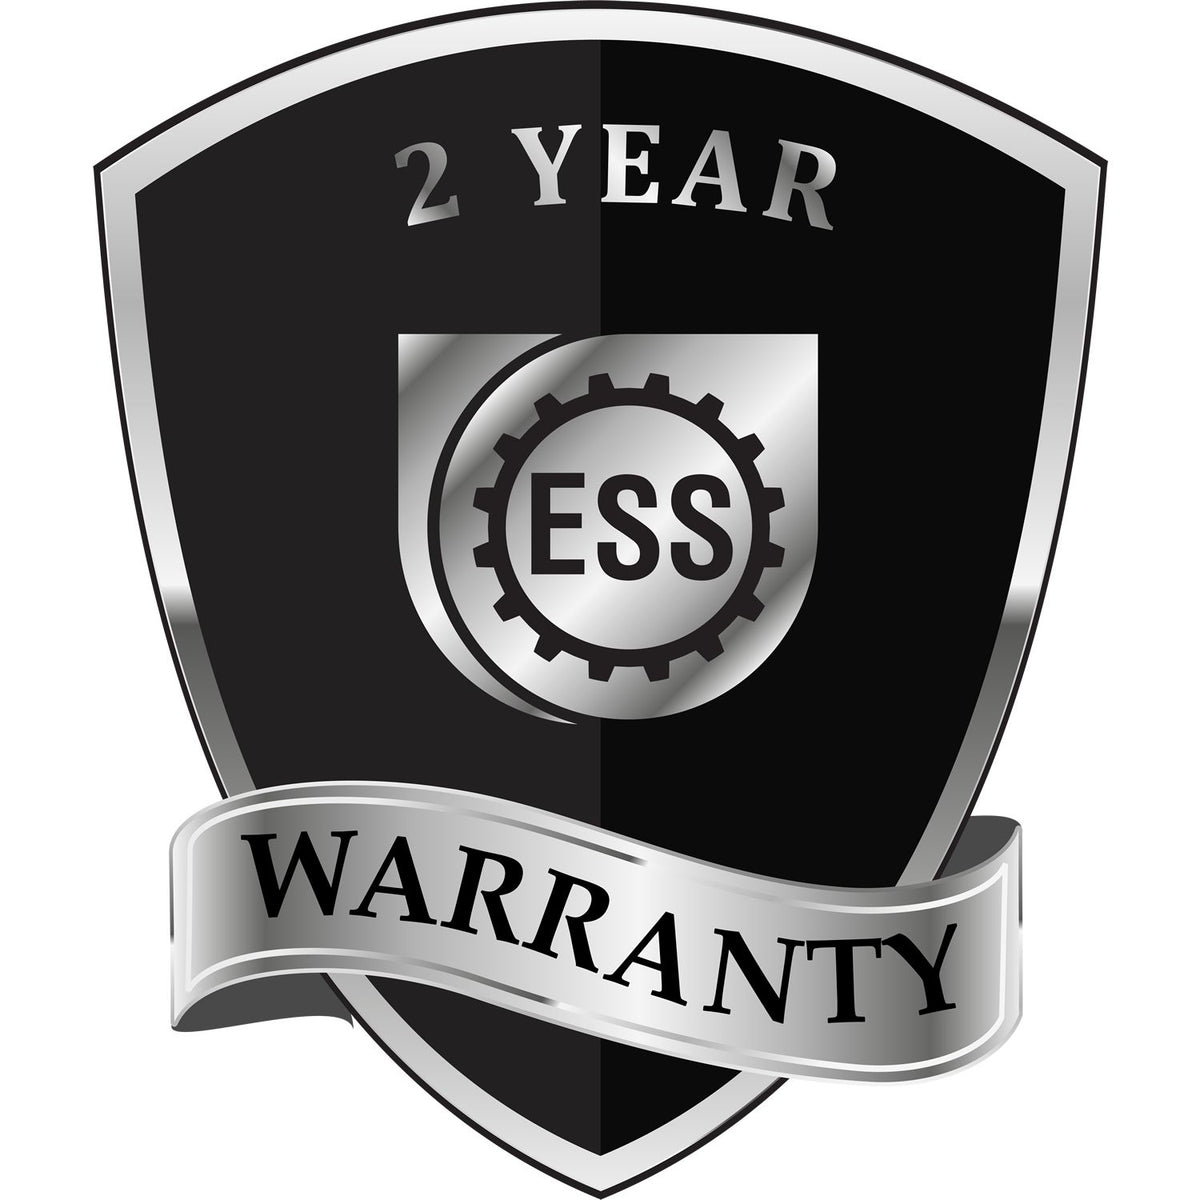 A black and silver badge or emblem showing warranty information for the Hybrid Massachusetts Engineer Seal